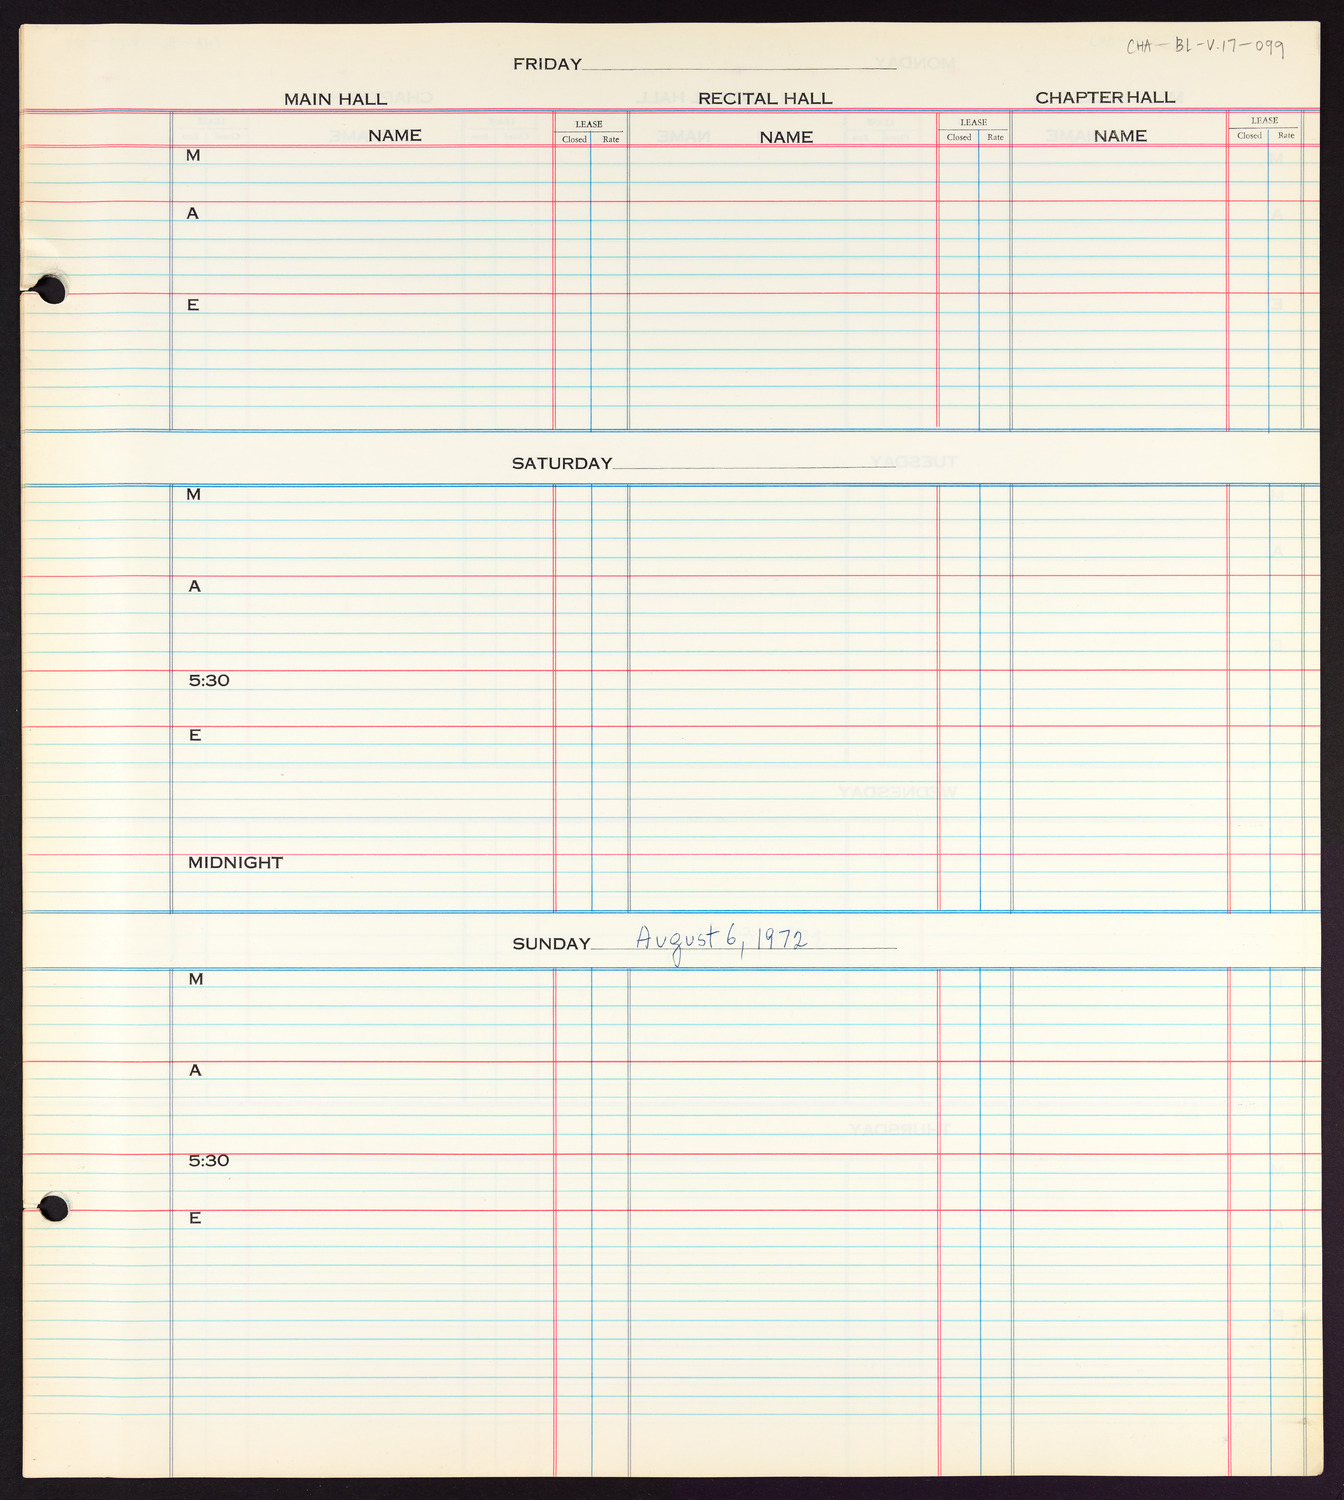 Carnegie Hall Booking Ledger, volume 17, page 99